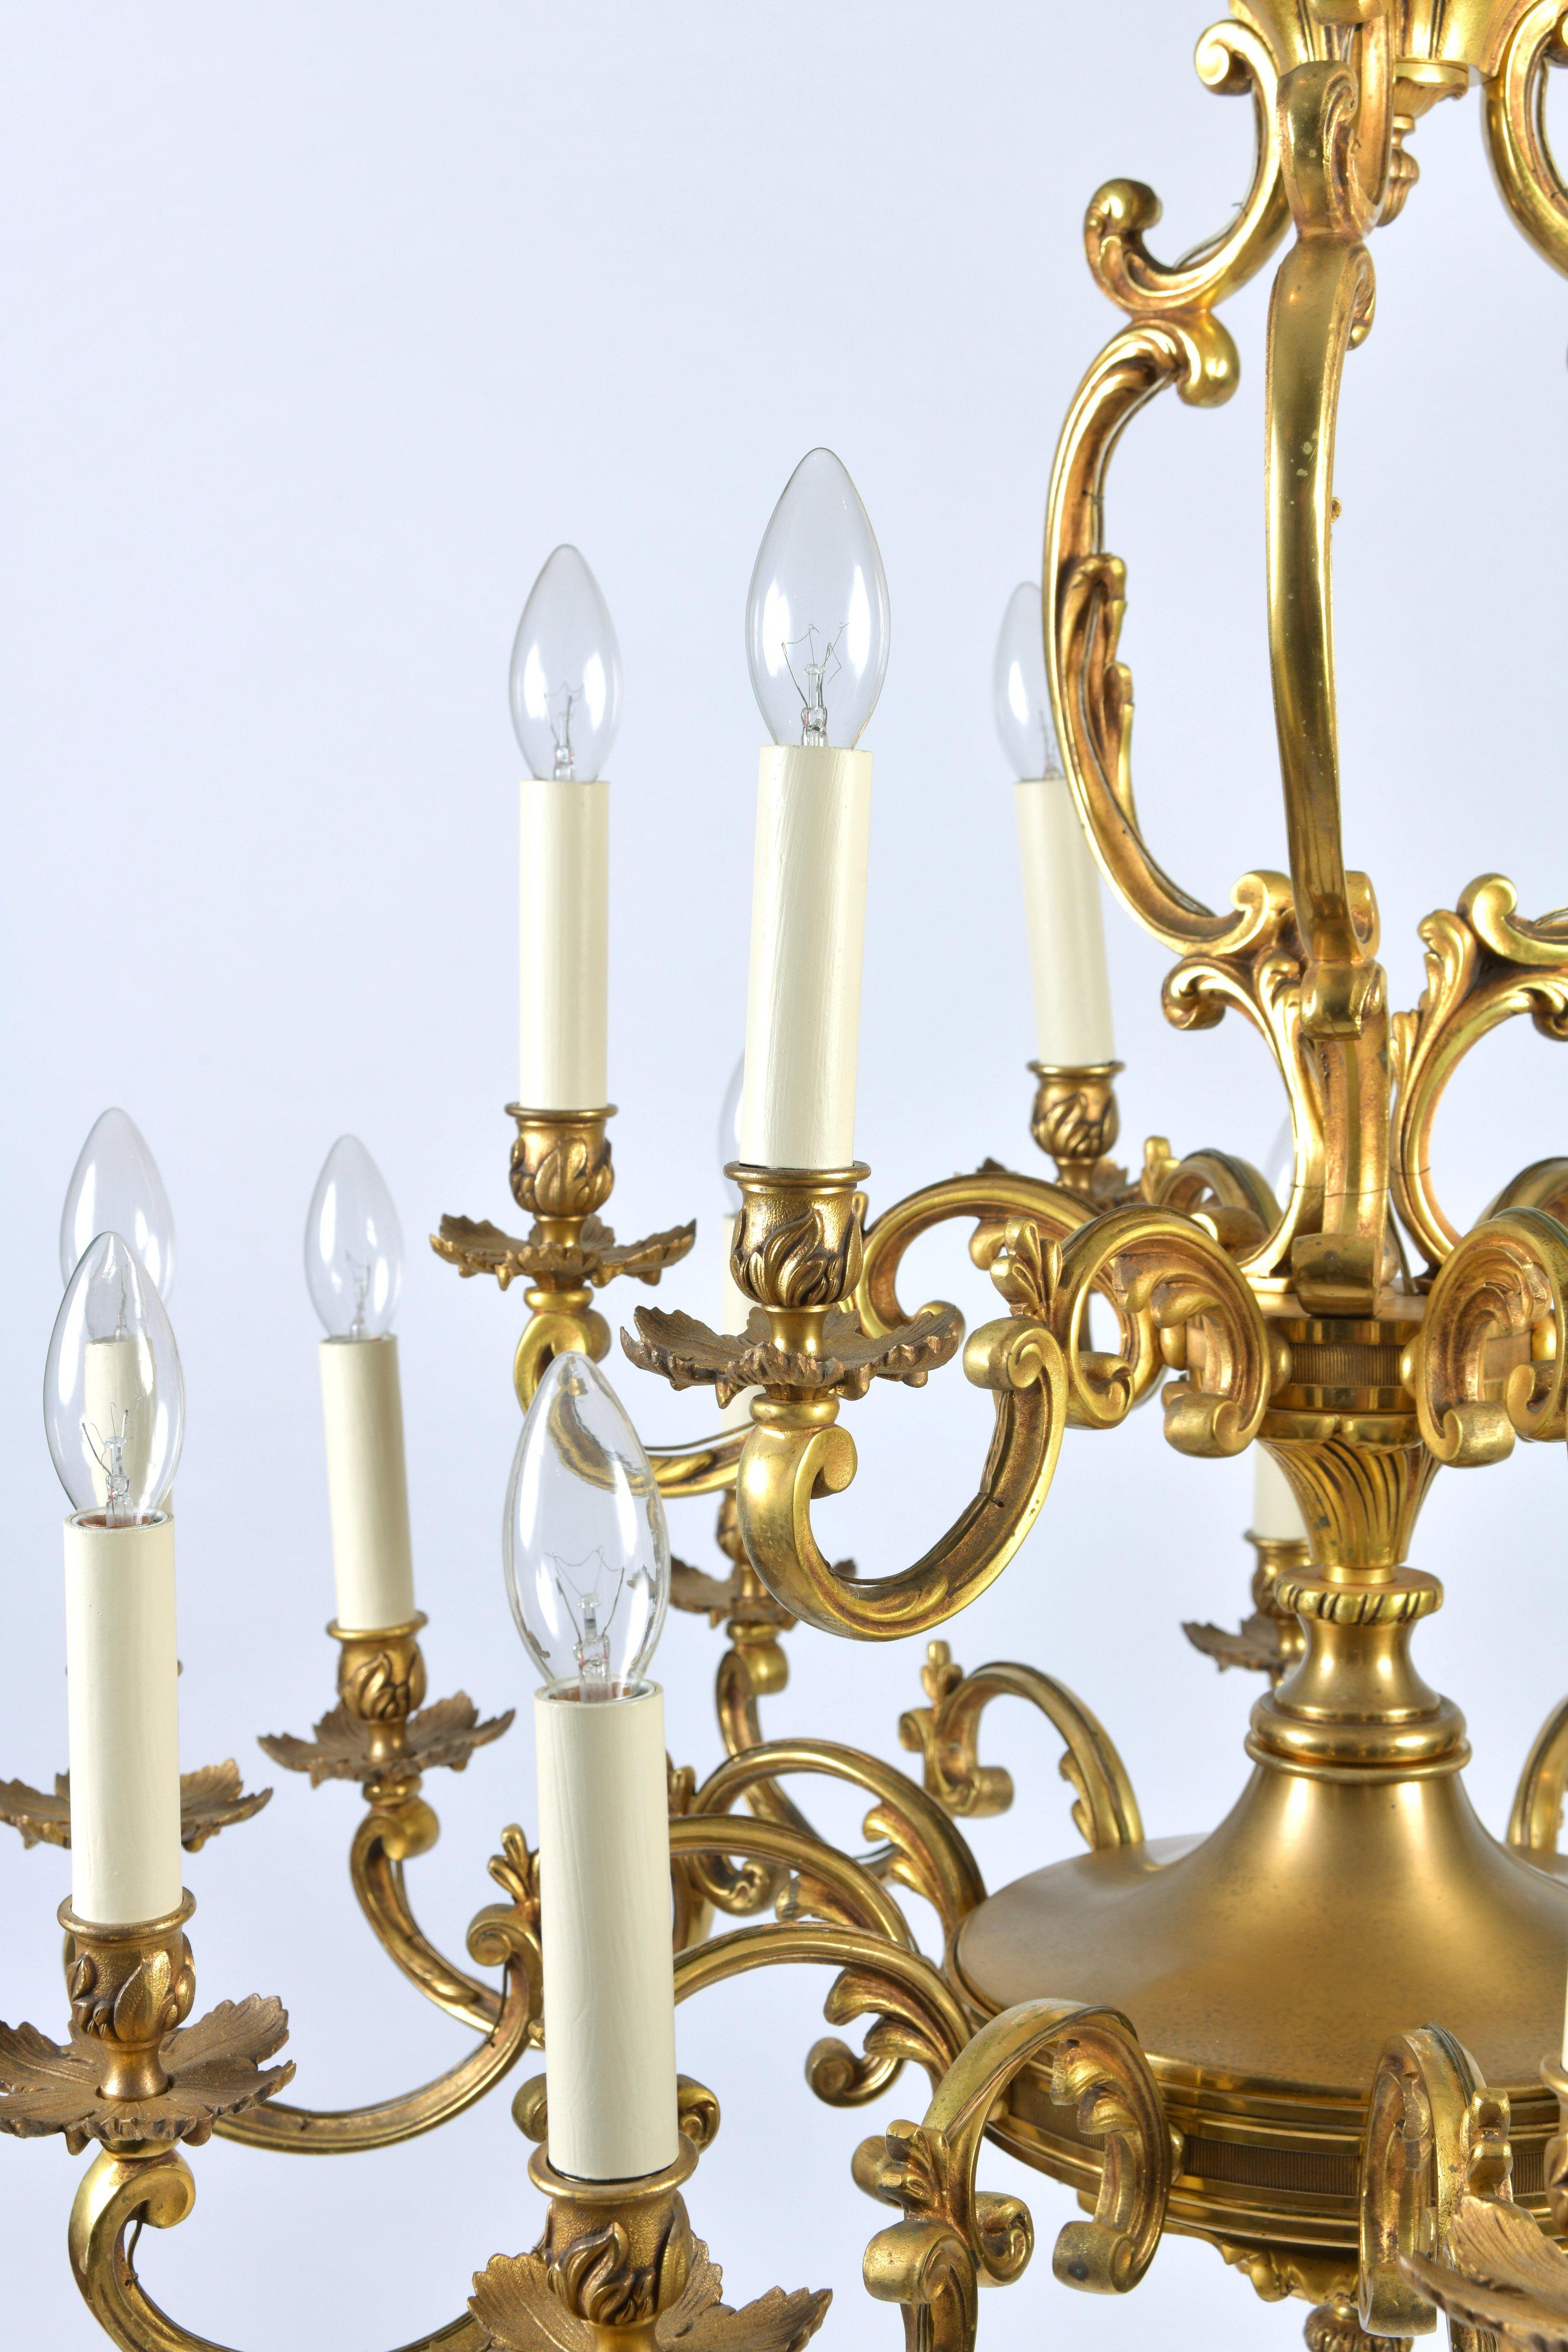 This outstanding and very striking English late 19th century ormolu chandelier features 18 branches with candlestick styled lights and a decorative central plate. The chandelier measures 34 in – 86.5 cm in diameter and 40 in – 101.5 cm in overall